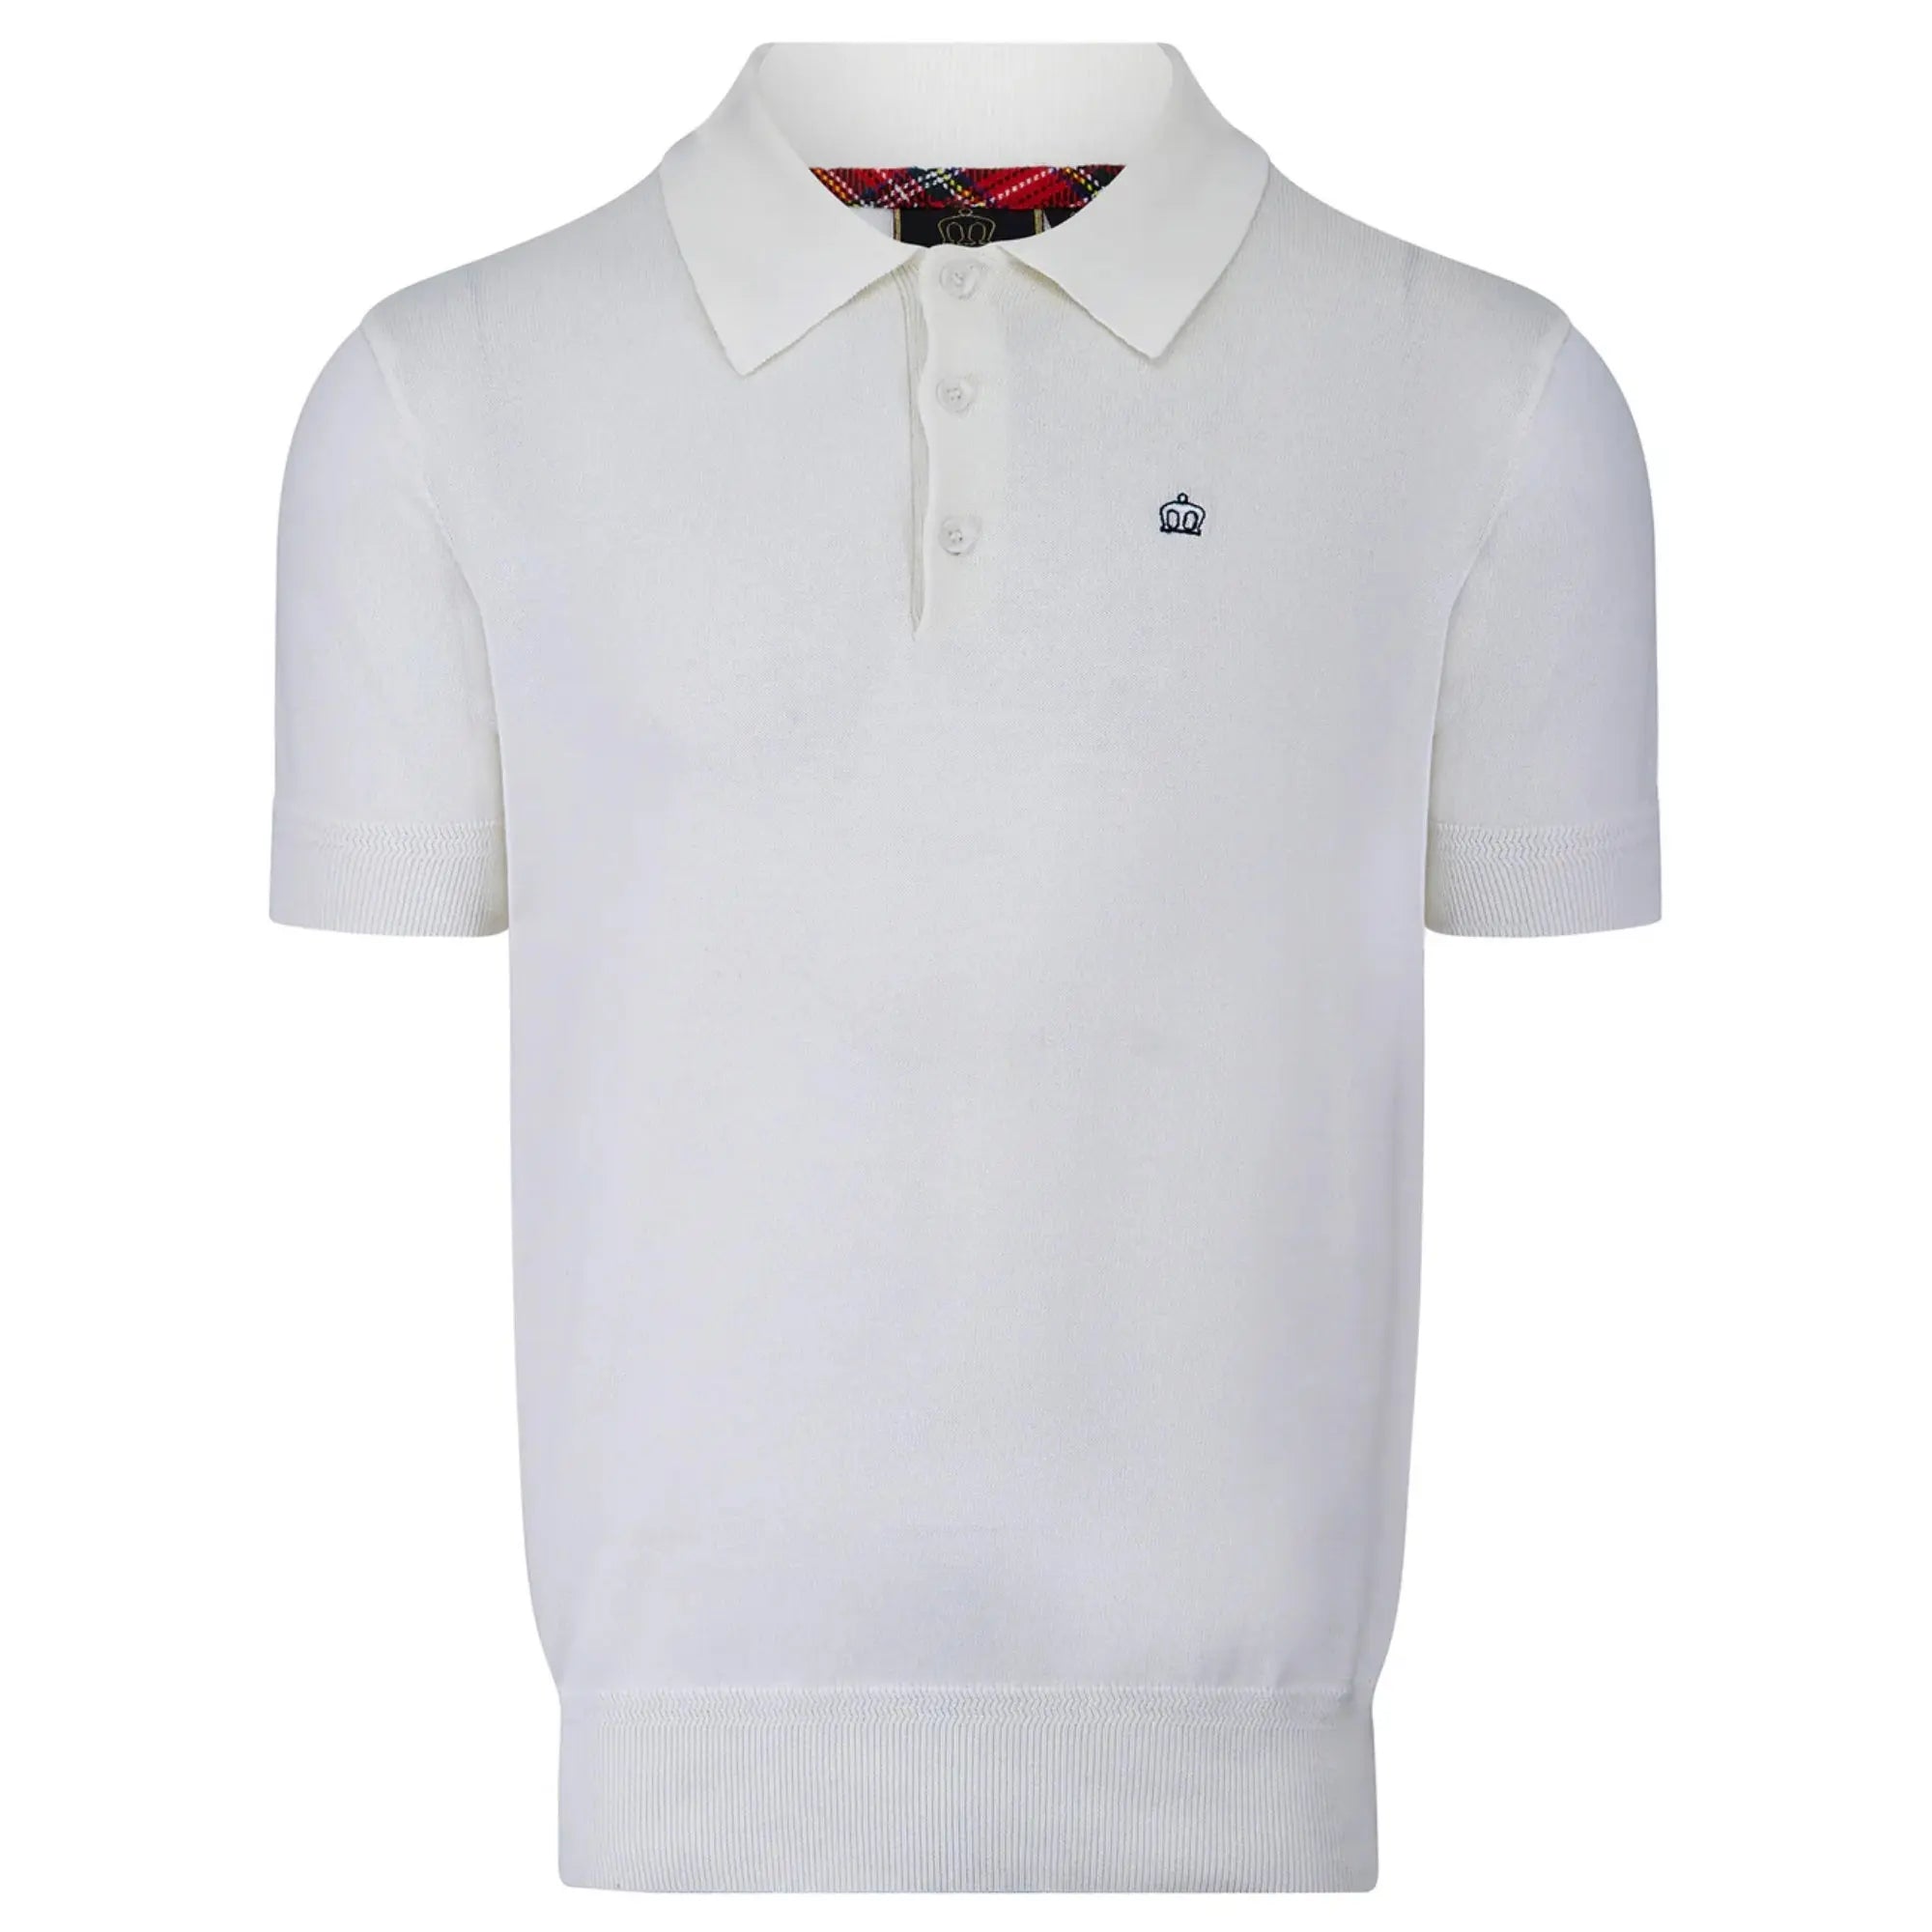 Merc London Archie Knitted Polo - White